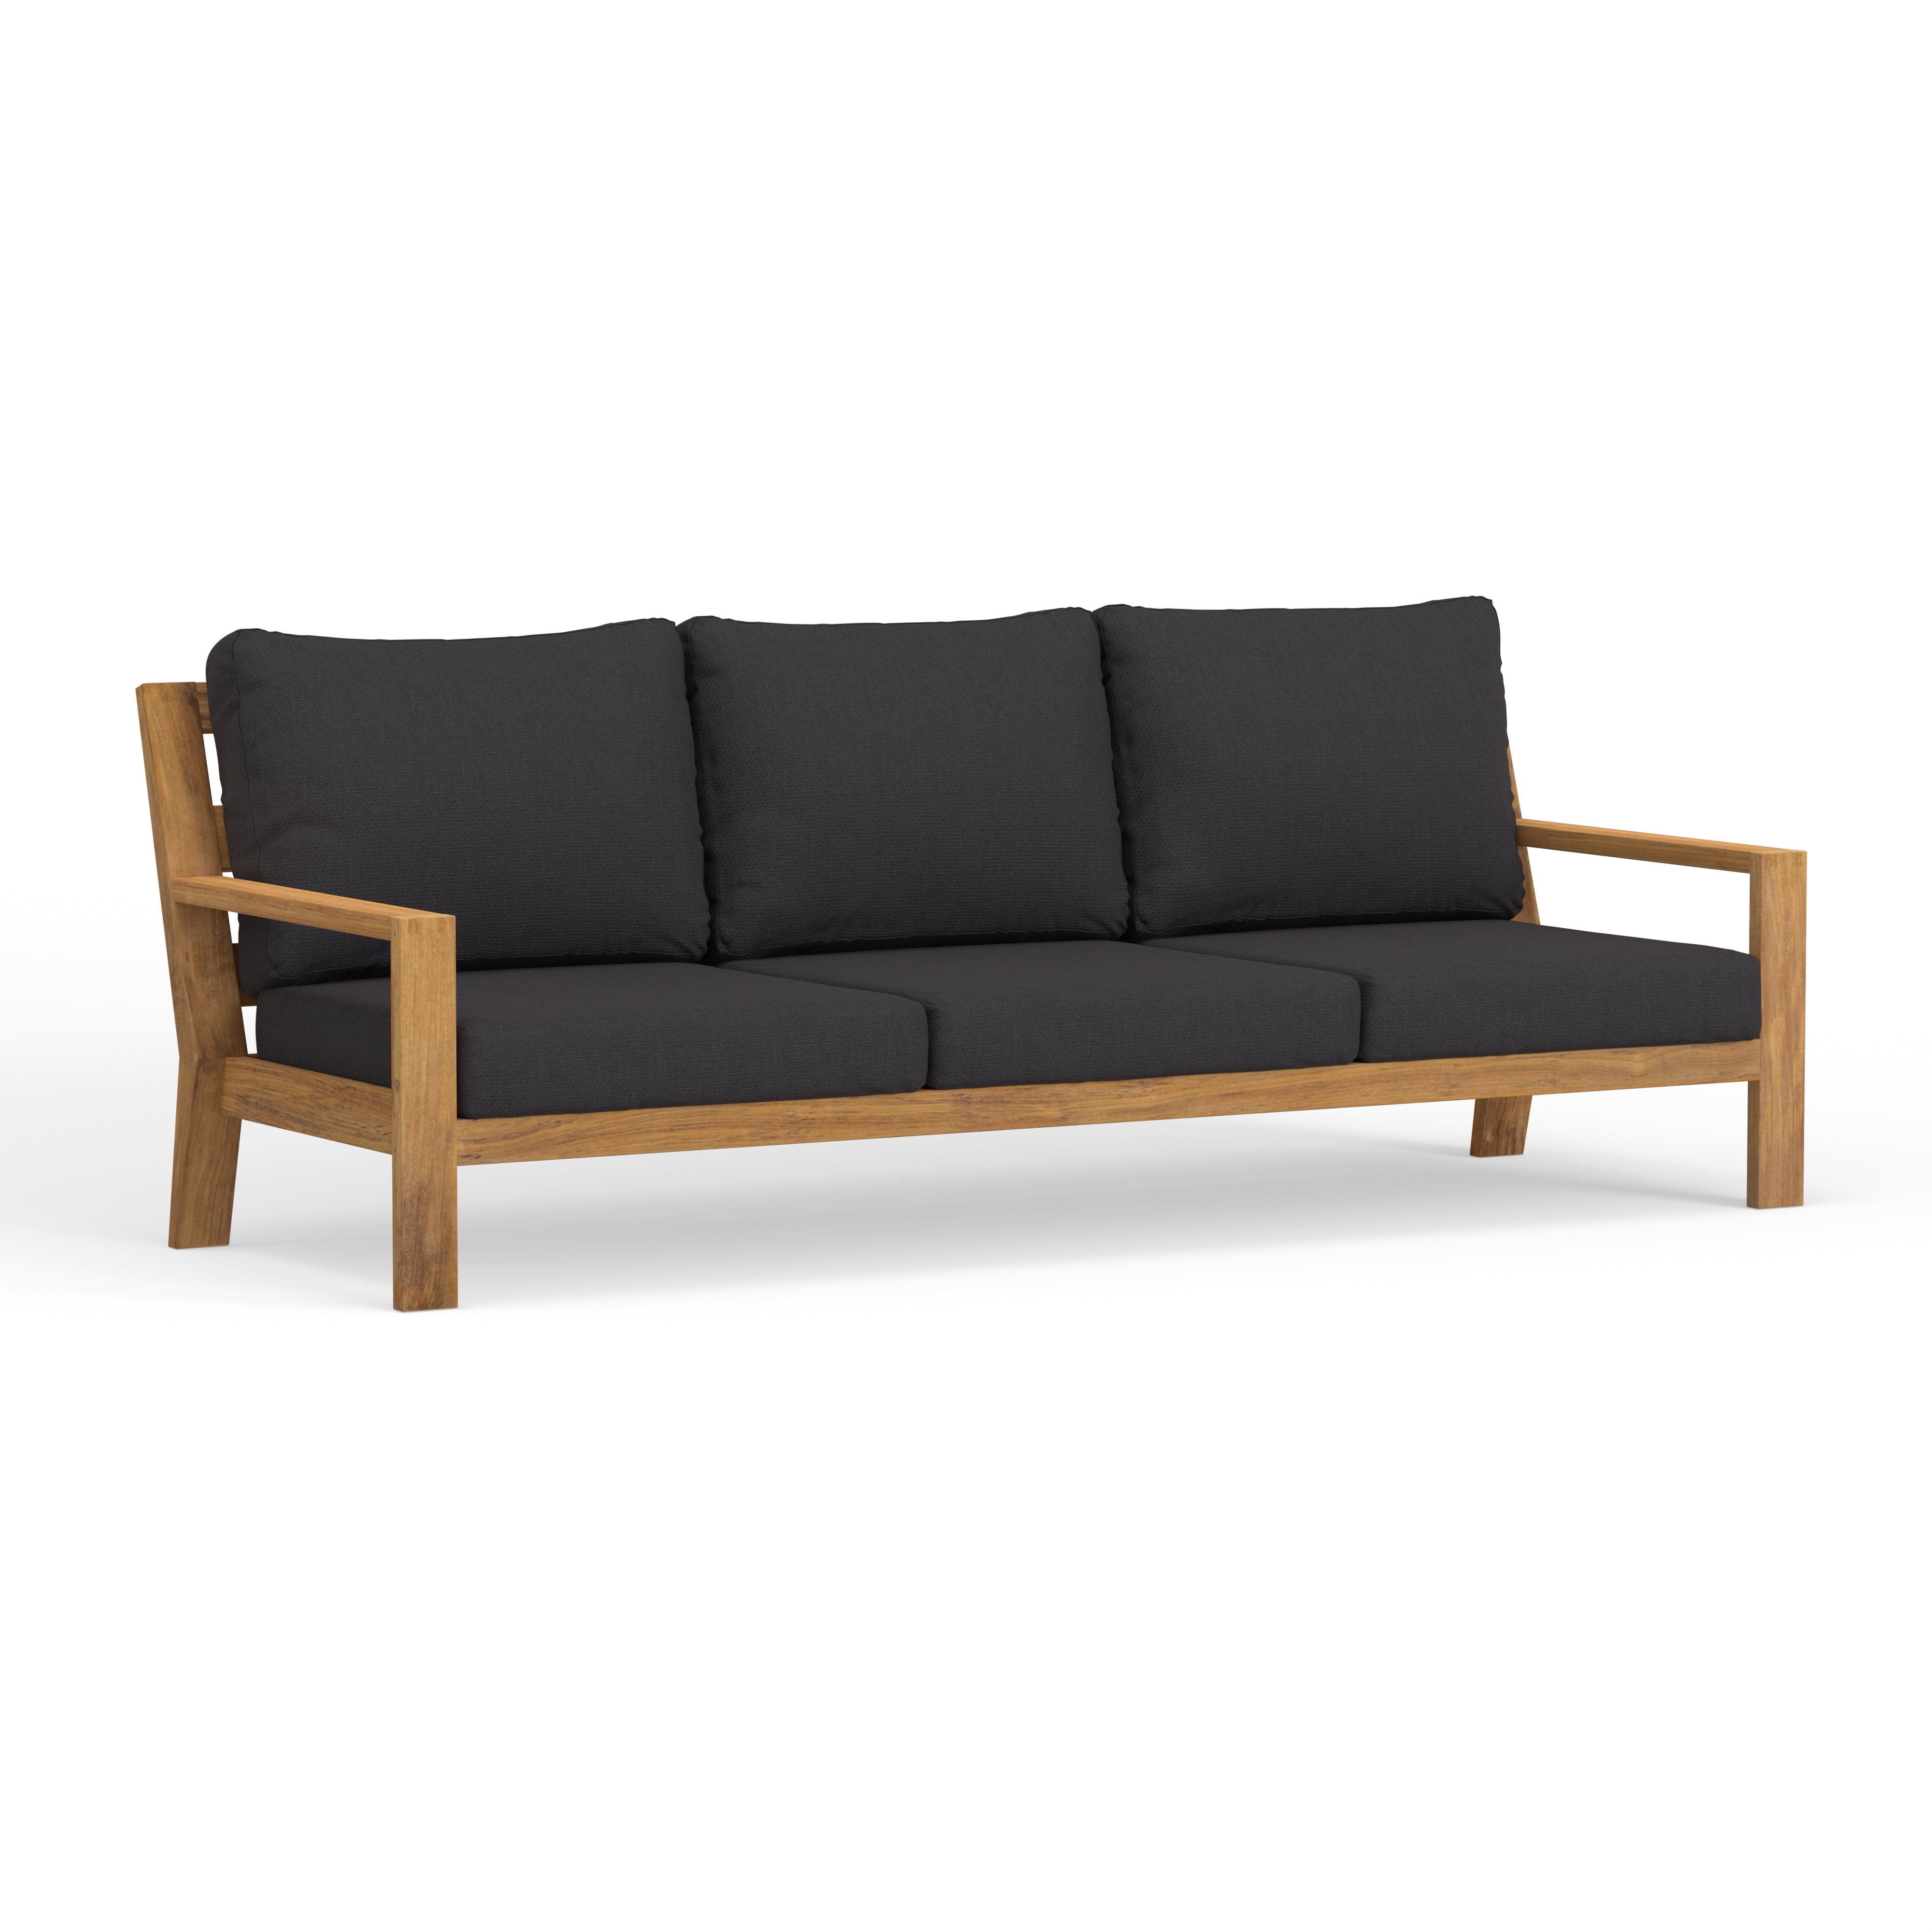 Best Looking Teak Sofa For Outdoors With Sunbrella Cushions Included In Any Color 